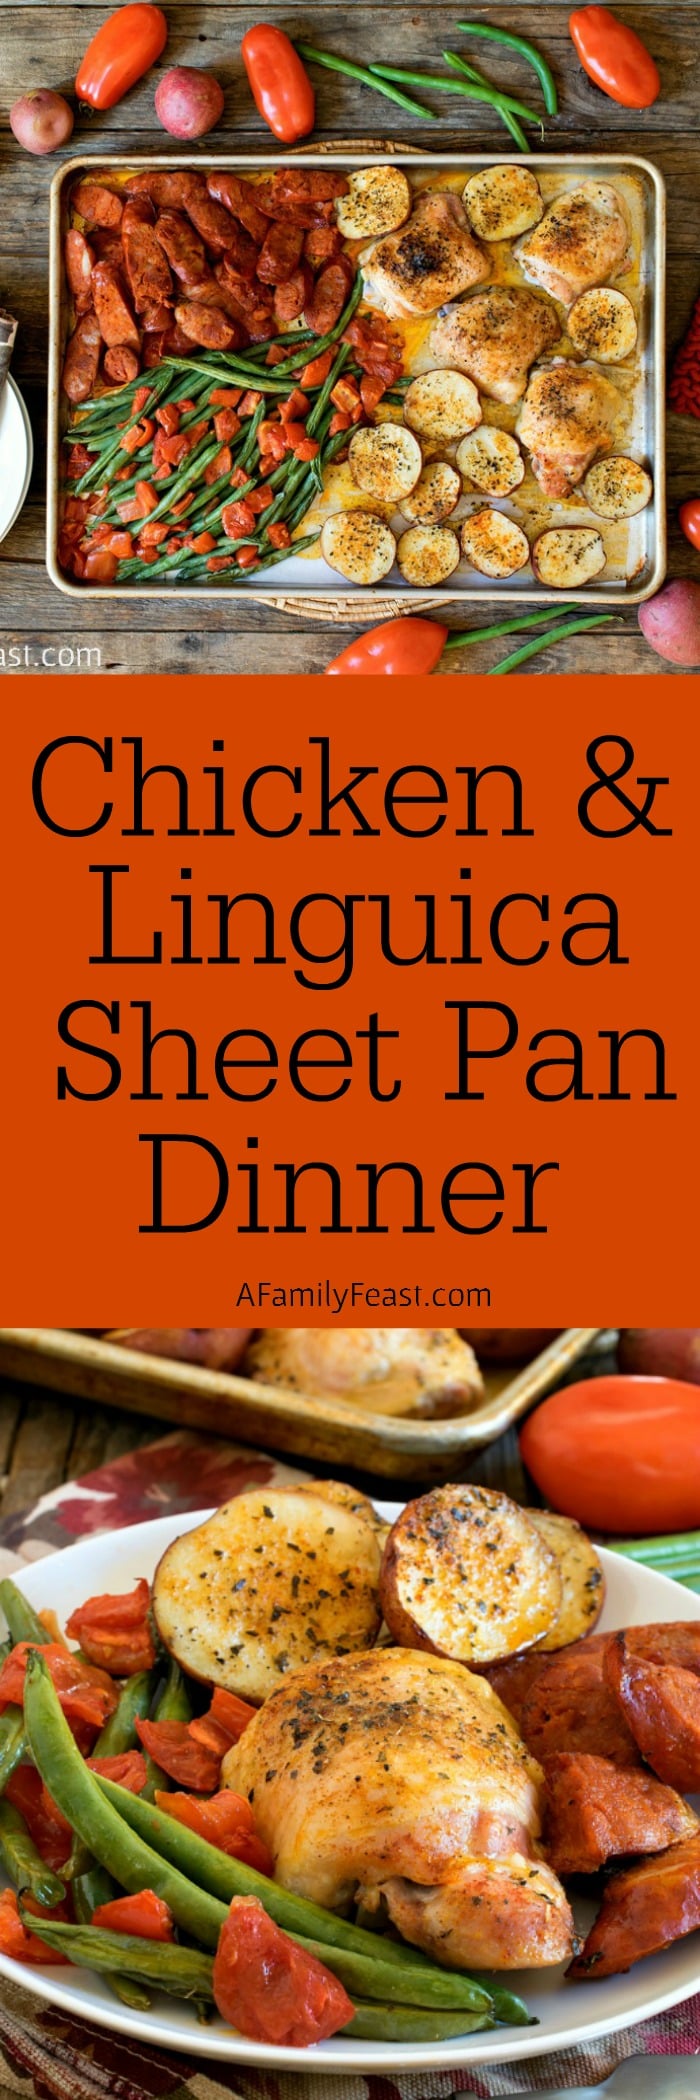 Chicken and Linguica Sheet Pan Dinner - This flavorful Portuguese-inspired dinner is easy to prepare and even easier to clean up afterwards!